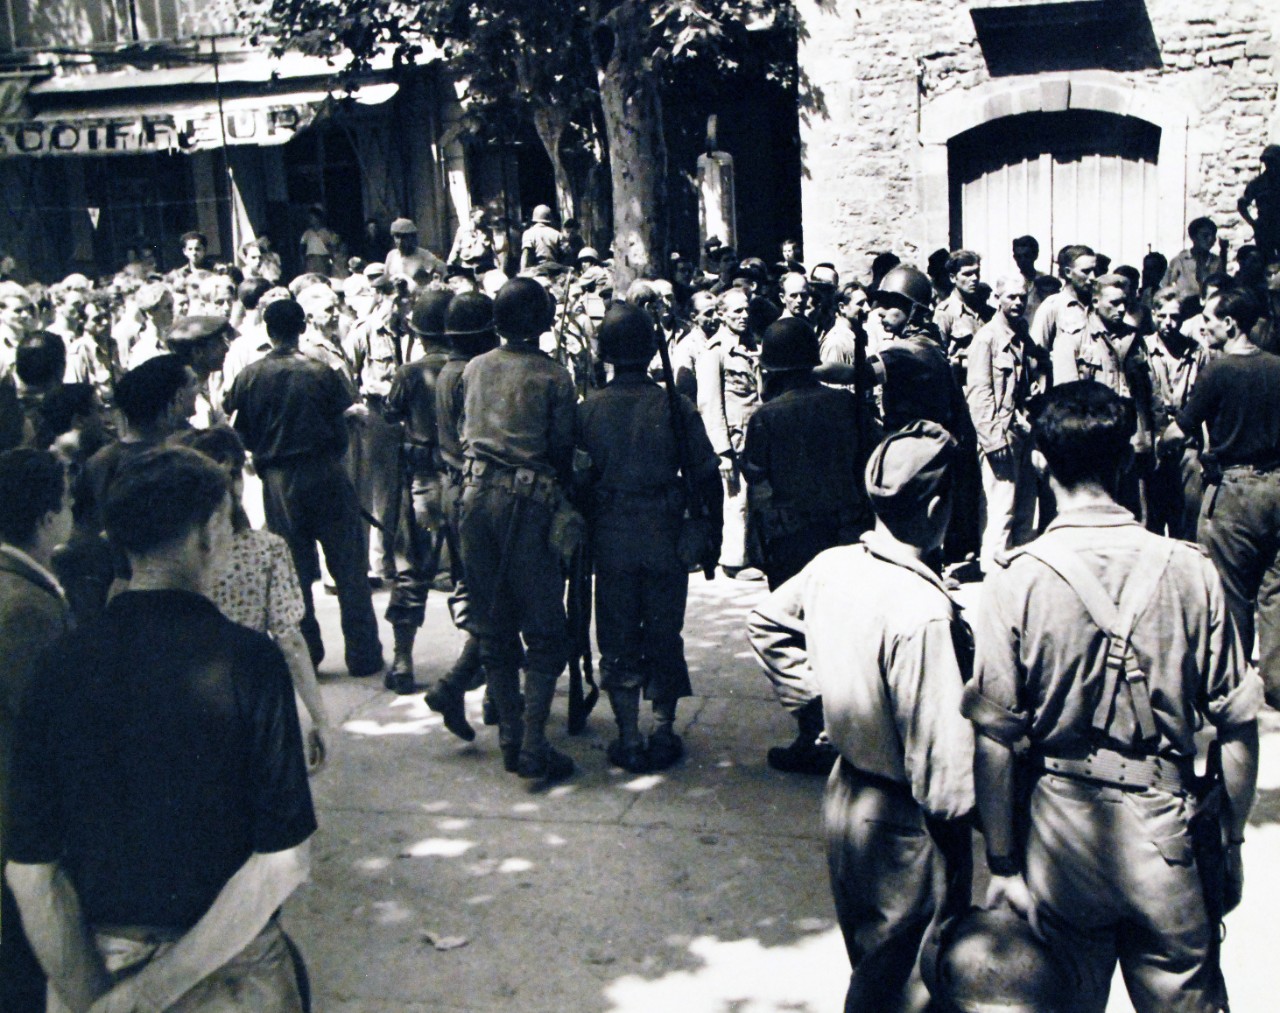 80-G-394120:   Invasion of Southern France, August 1944. Prisoners of War near Toulon, France.   Photograph received 12 July 1948.  Official U.S. Navy Photograph, now in the collections of the National Archives.   (2014/9/16). 